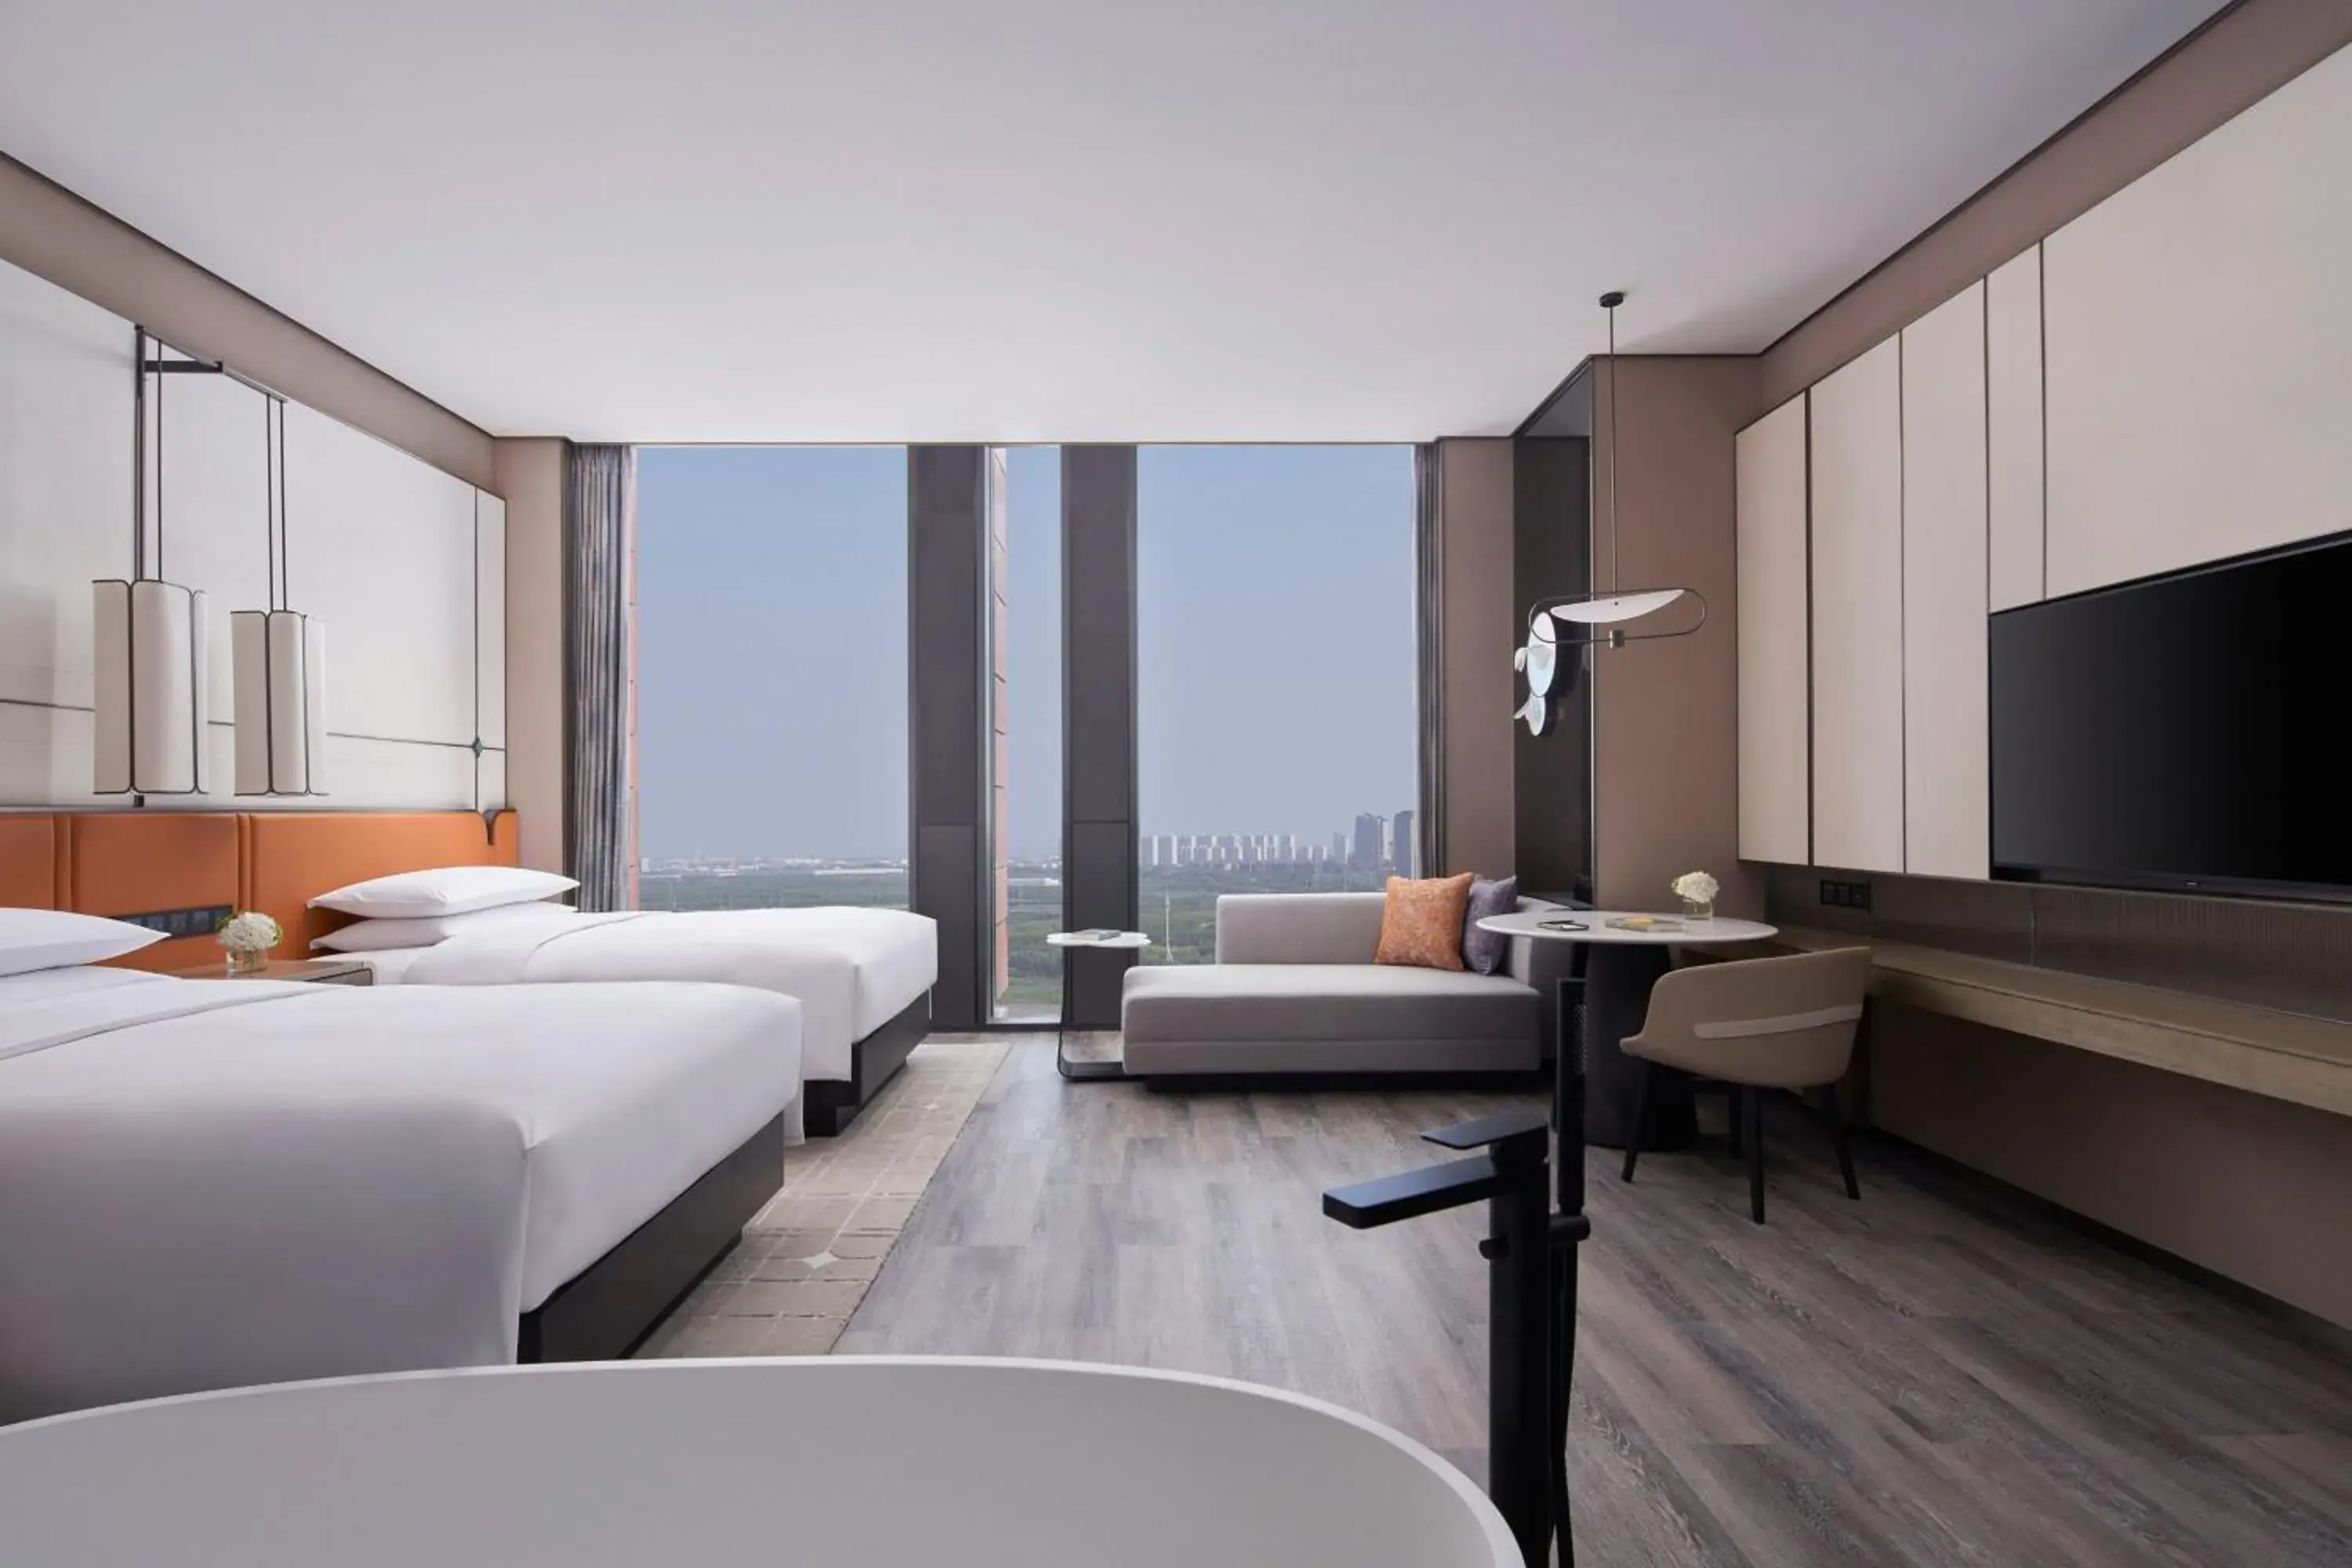 Bedroom in Tianjin Marriott Hotel National Convention and Exhibition Center